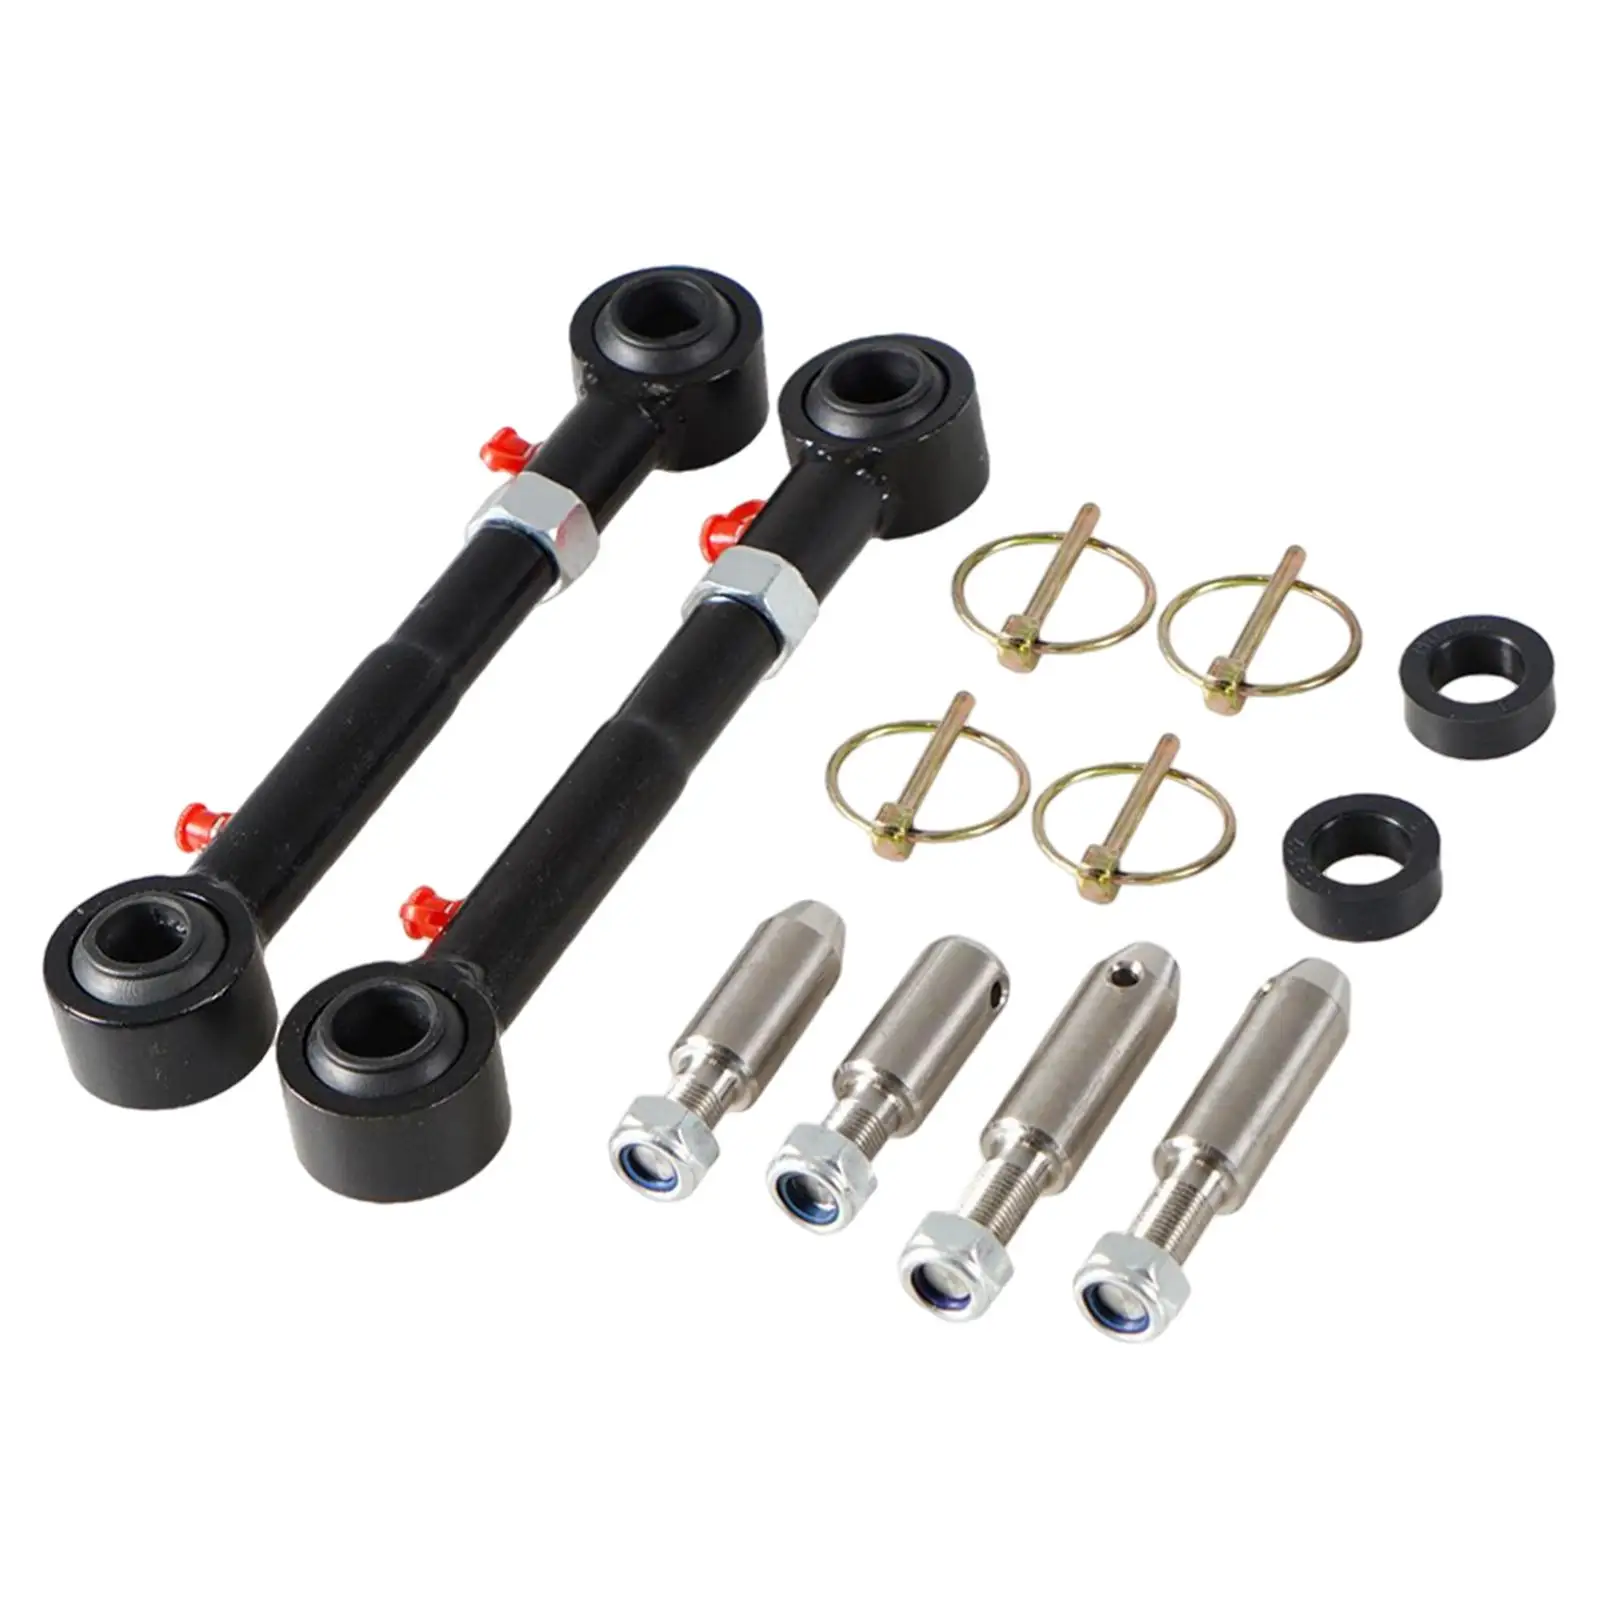 Front Sway Bar Links Disconnects Stainless Steel for Jeep Wrangler JK Jku 07-18 Auto Replaces Parts Stabiliser Bars